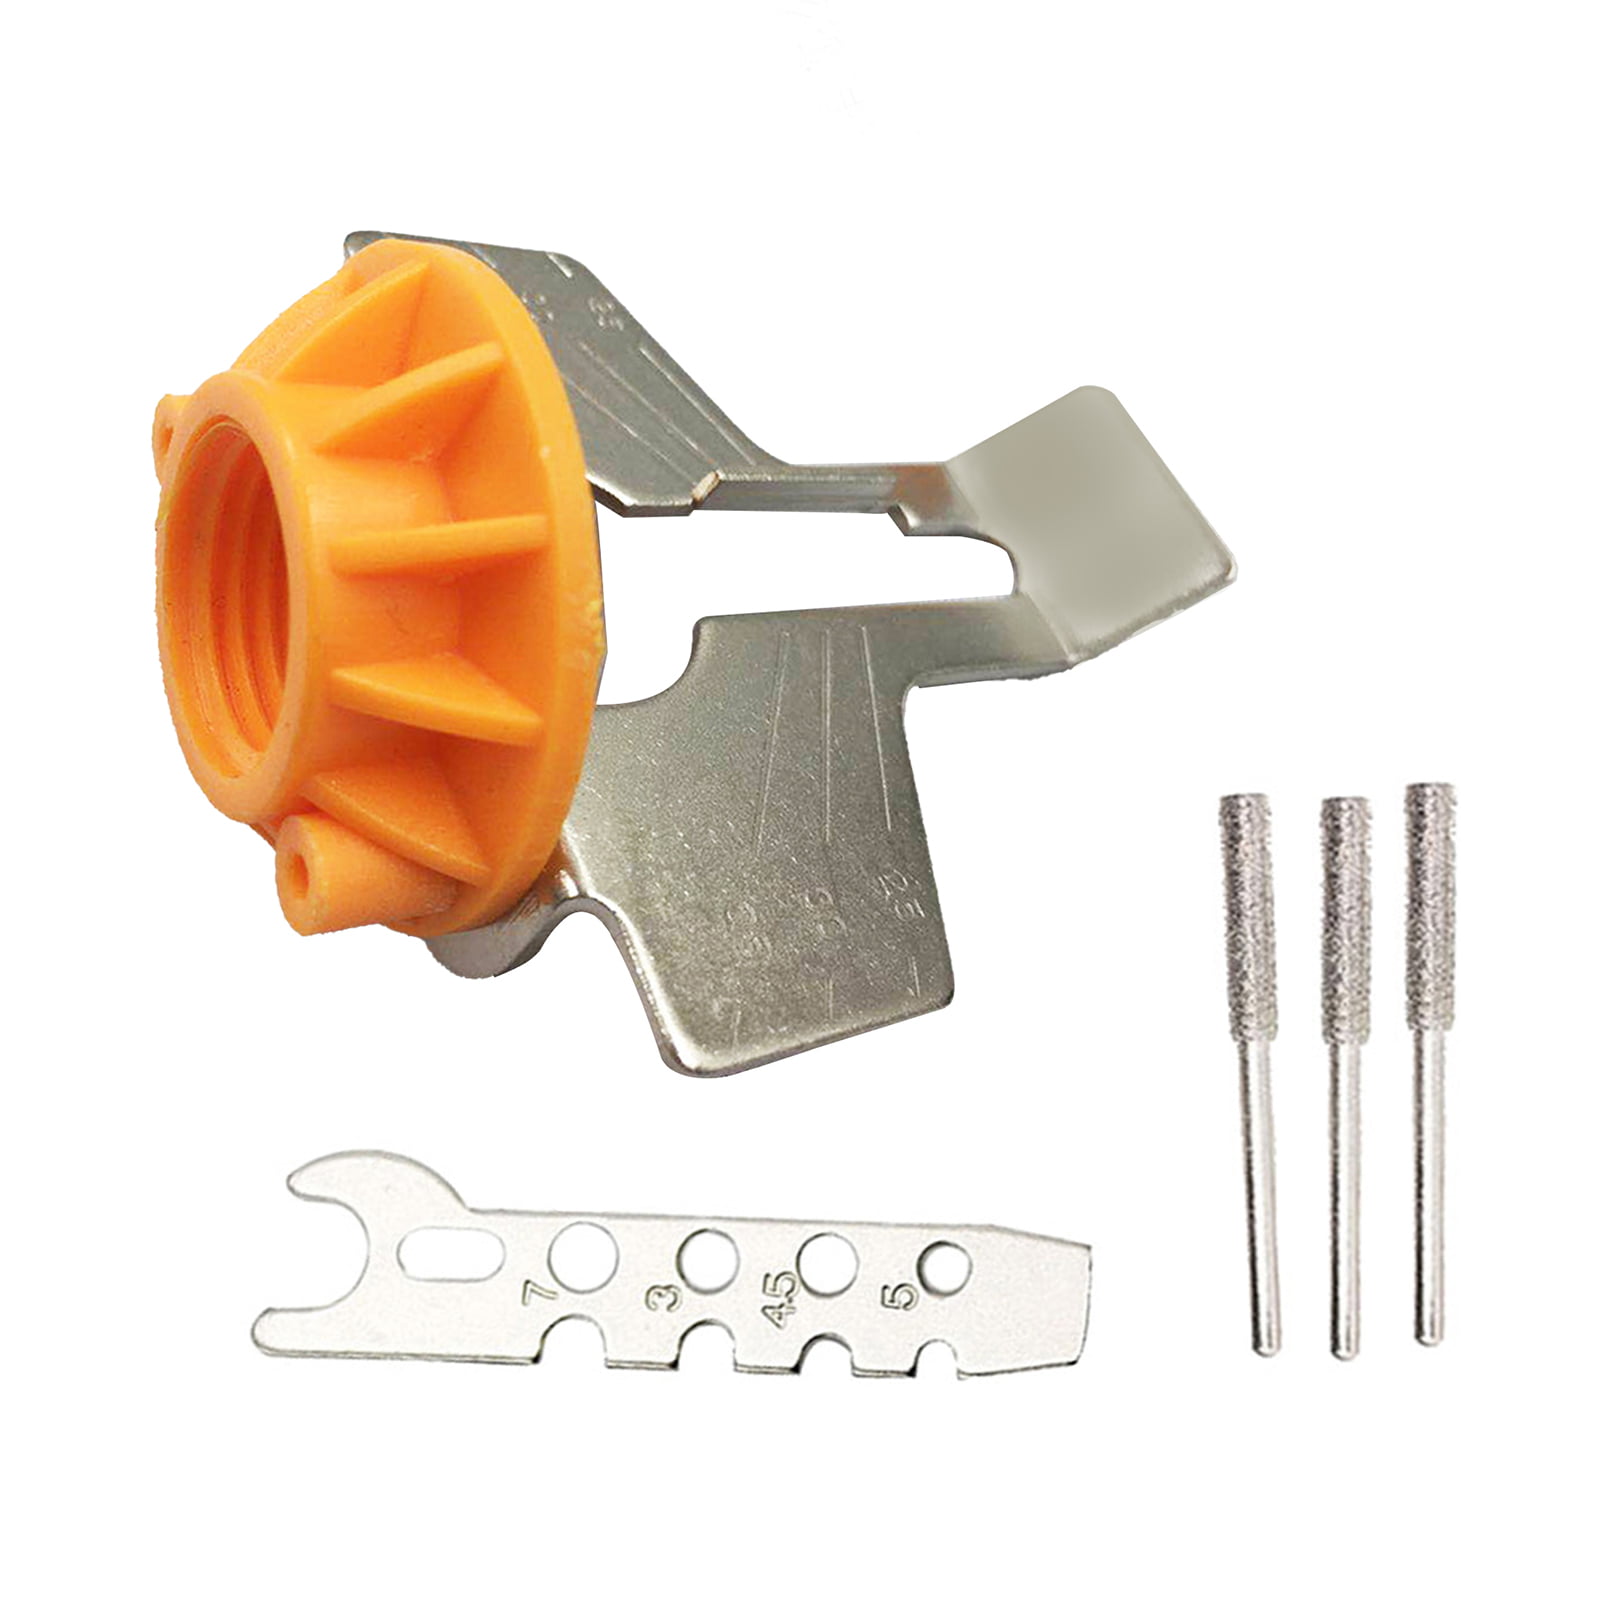 Sharpening Attachment Chain Saw Tooth Grinding Tools Used With Electric Grinder 